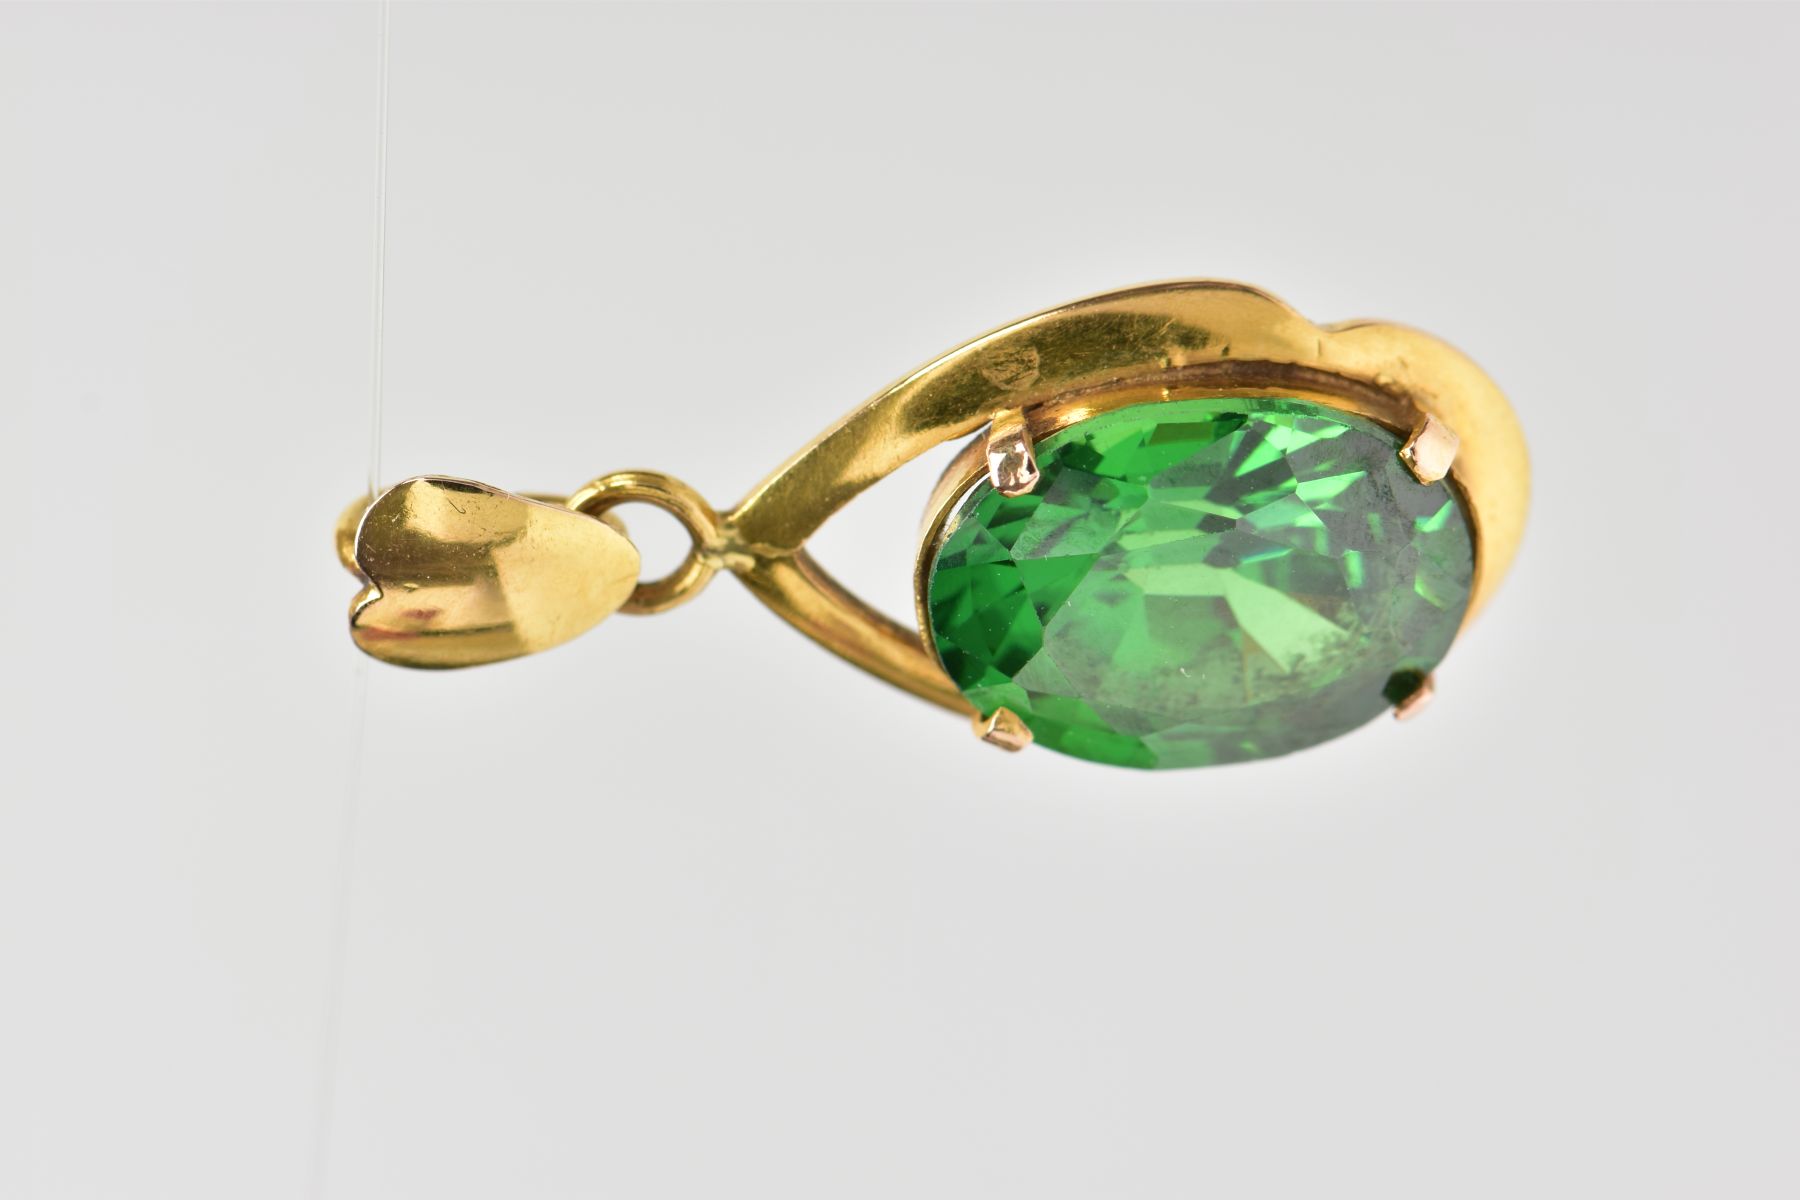 A YELLOW METAL GEM SET PENDANT, centring on an oval cut green stone assessed as chrome diopside, - Image 2 of 3